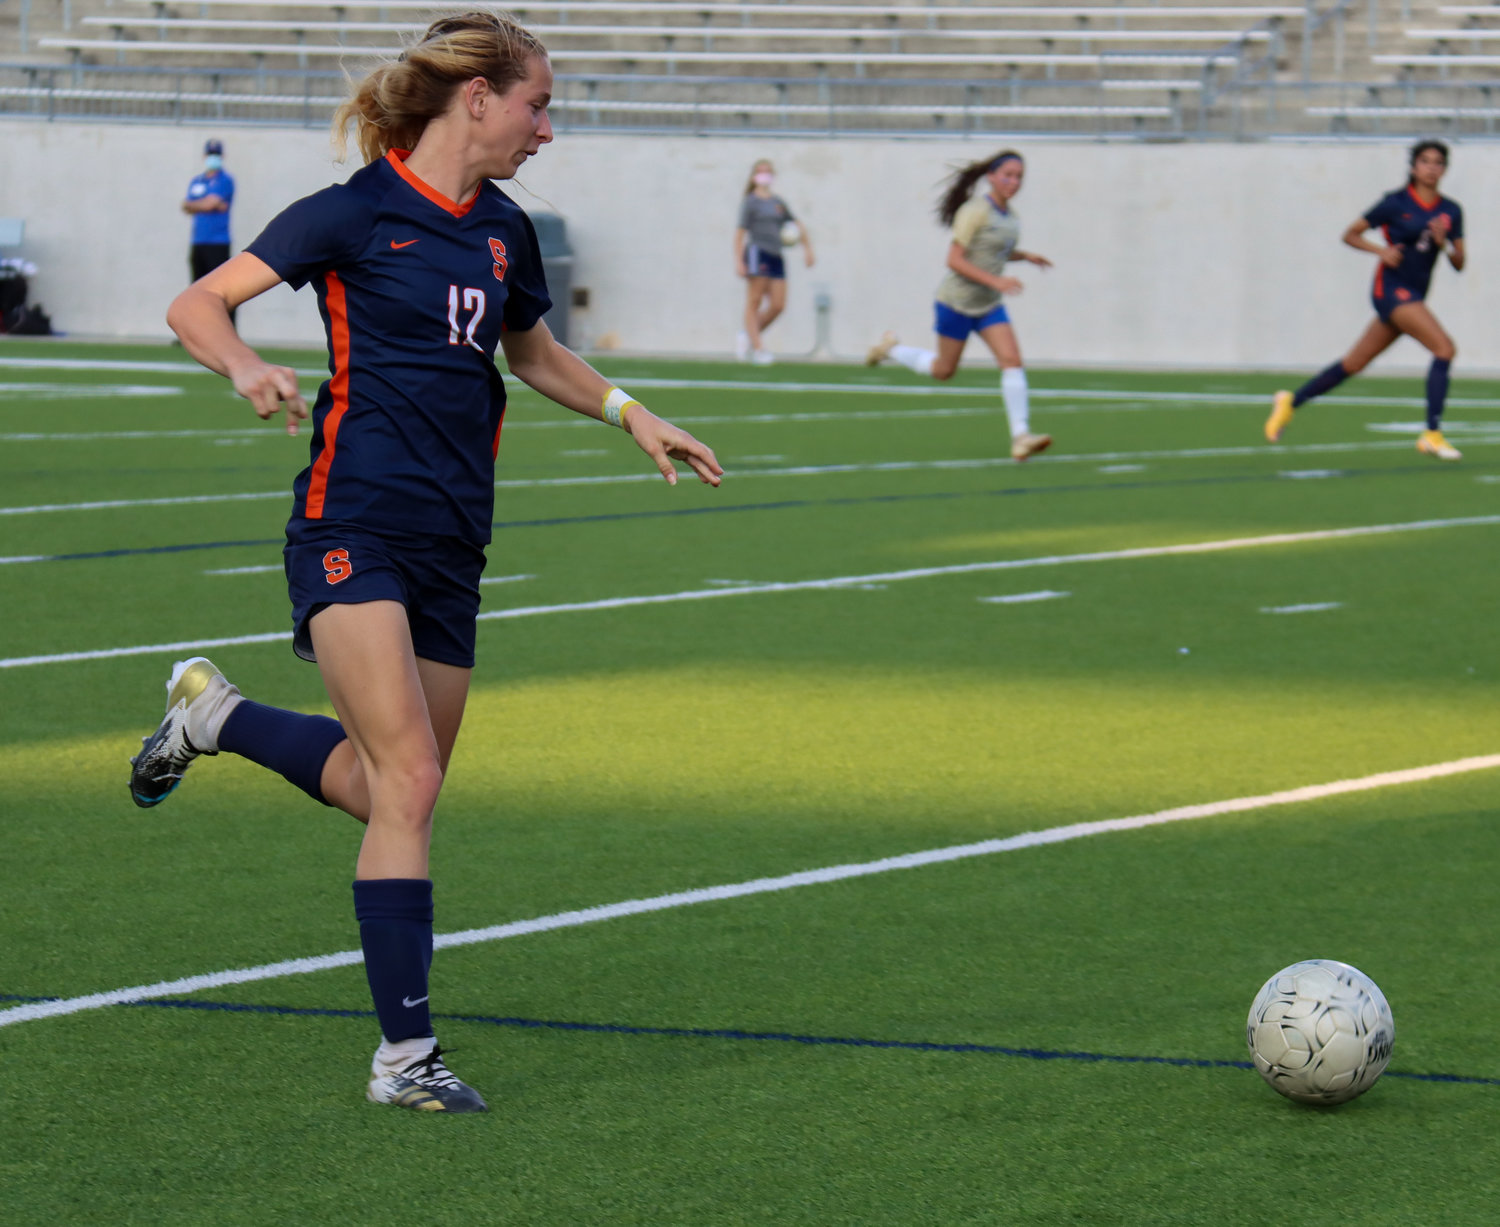 Seven Lakes senior forward Paige Boucher attacks downfield against an Elkins defender during the Spartans’ 7-0 Class 6A bi-district playoff win on Friday, March 26, at Legacy Stadium.